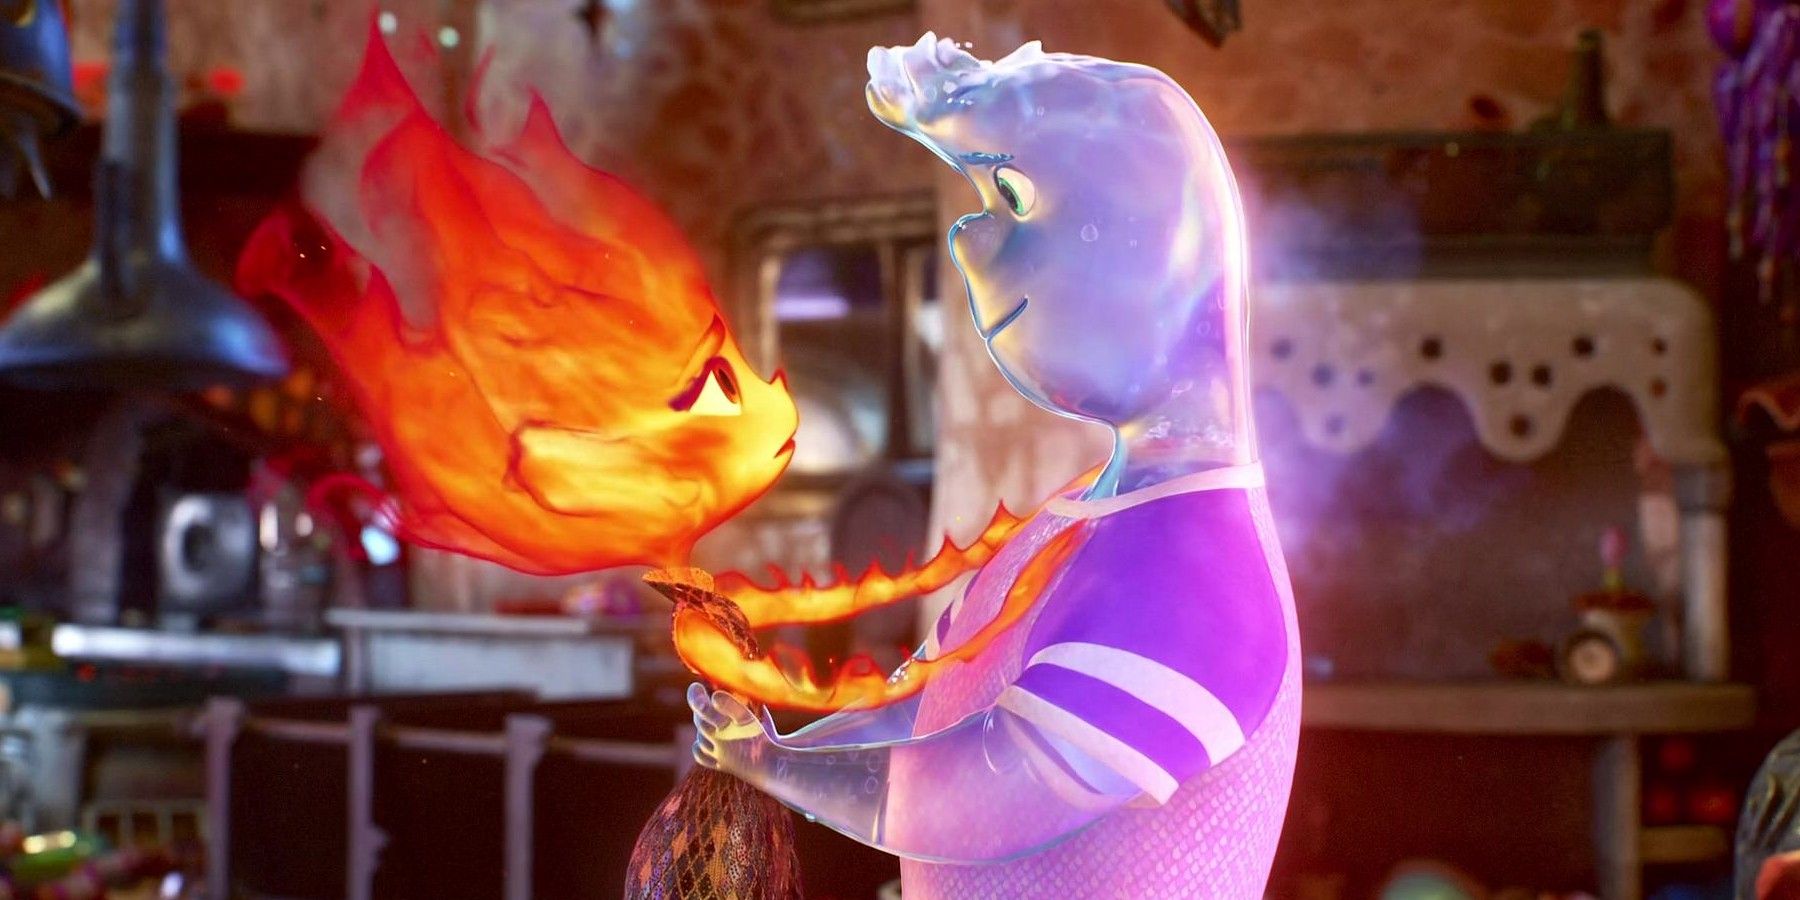 Elemental 2 Chances Get Hopeful Response From Pixar Star After 6M Box Office Comeback